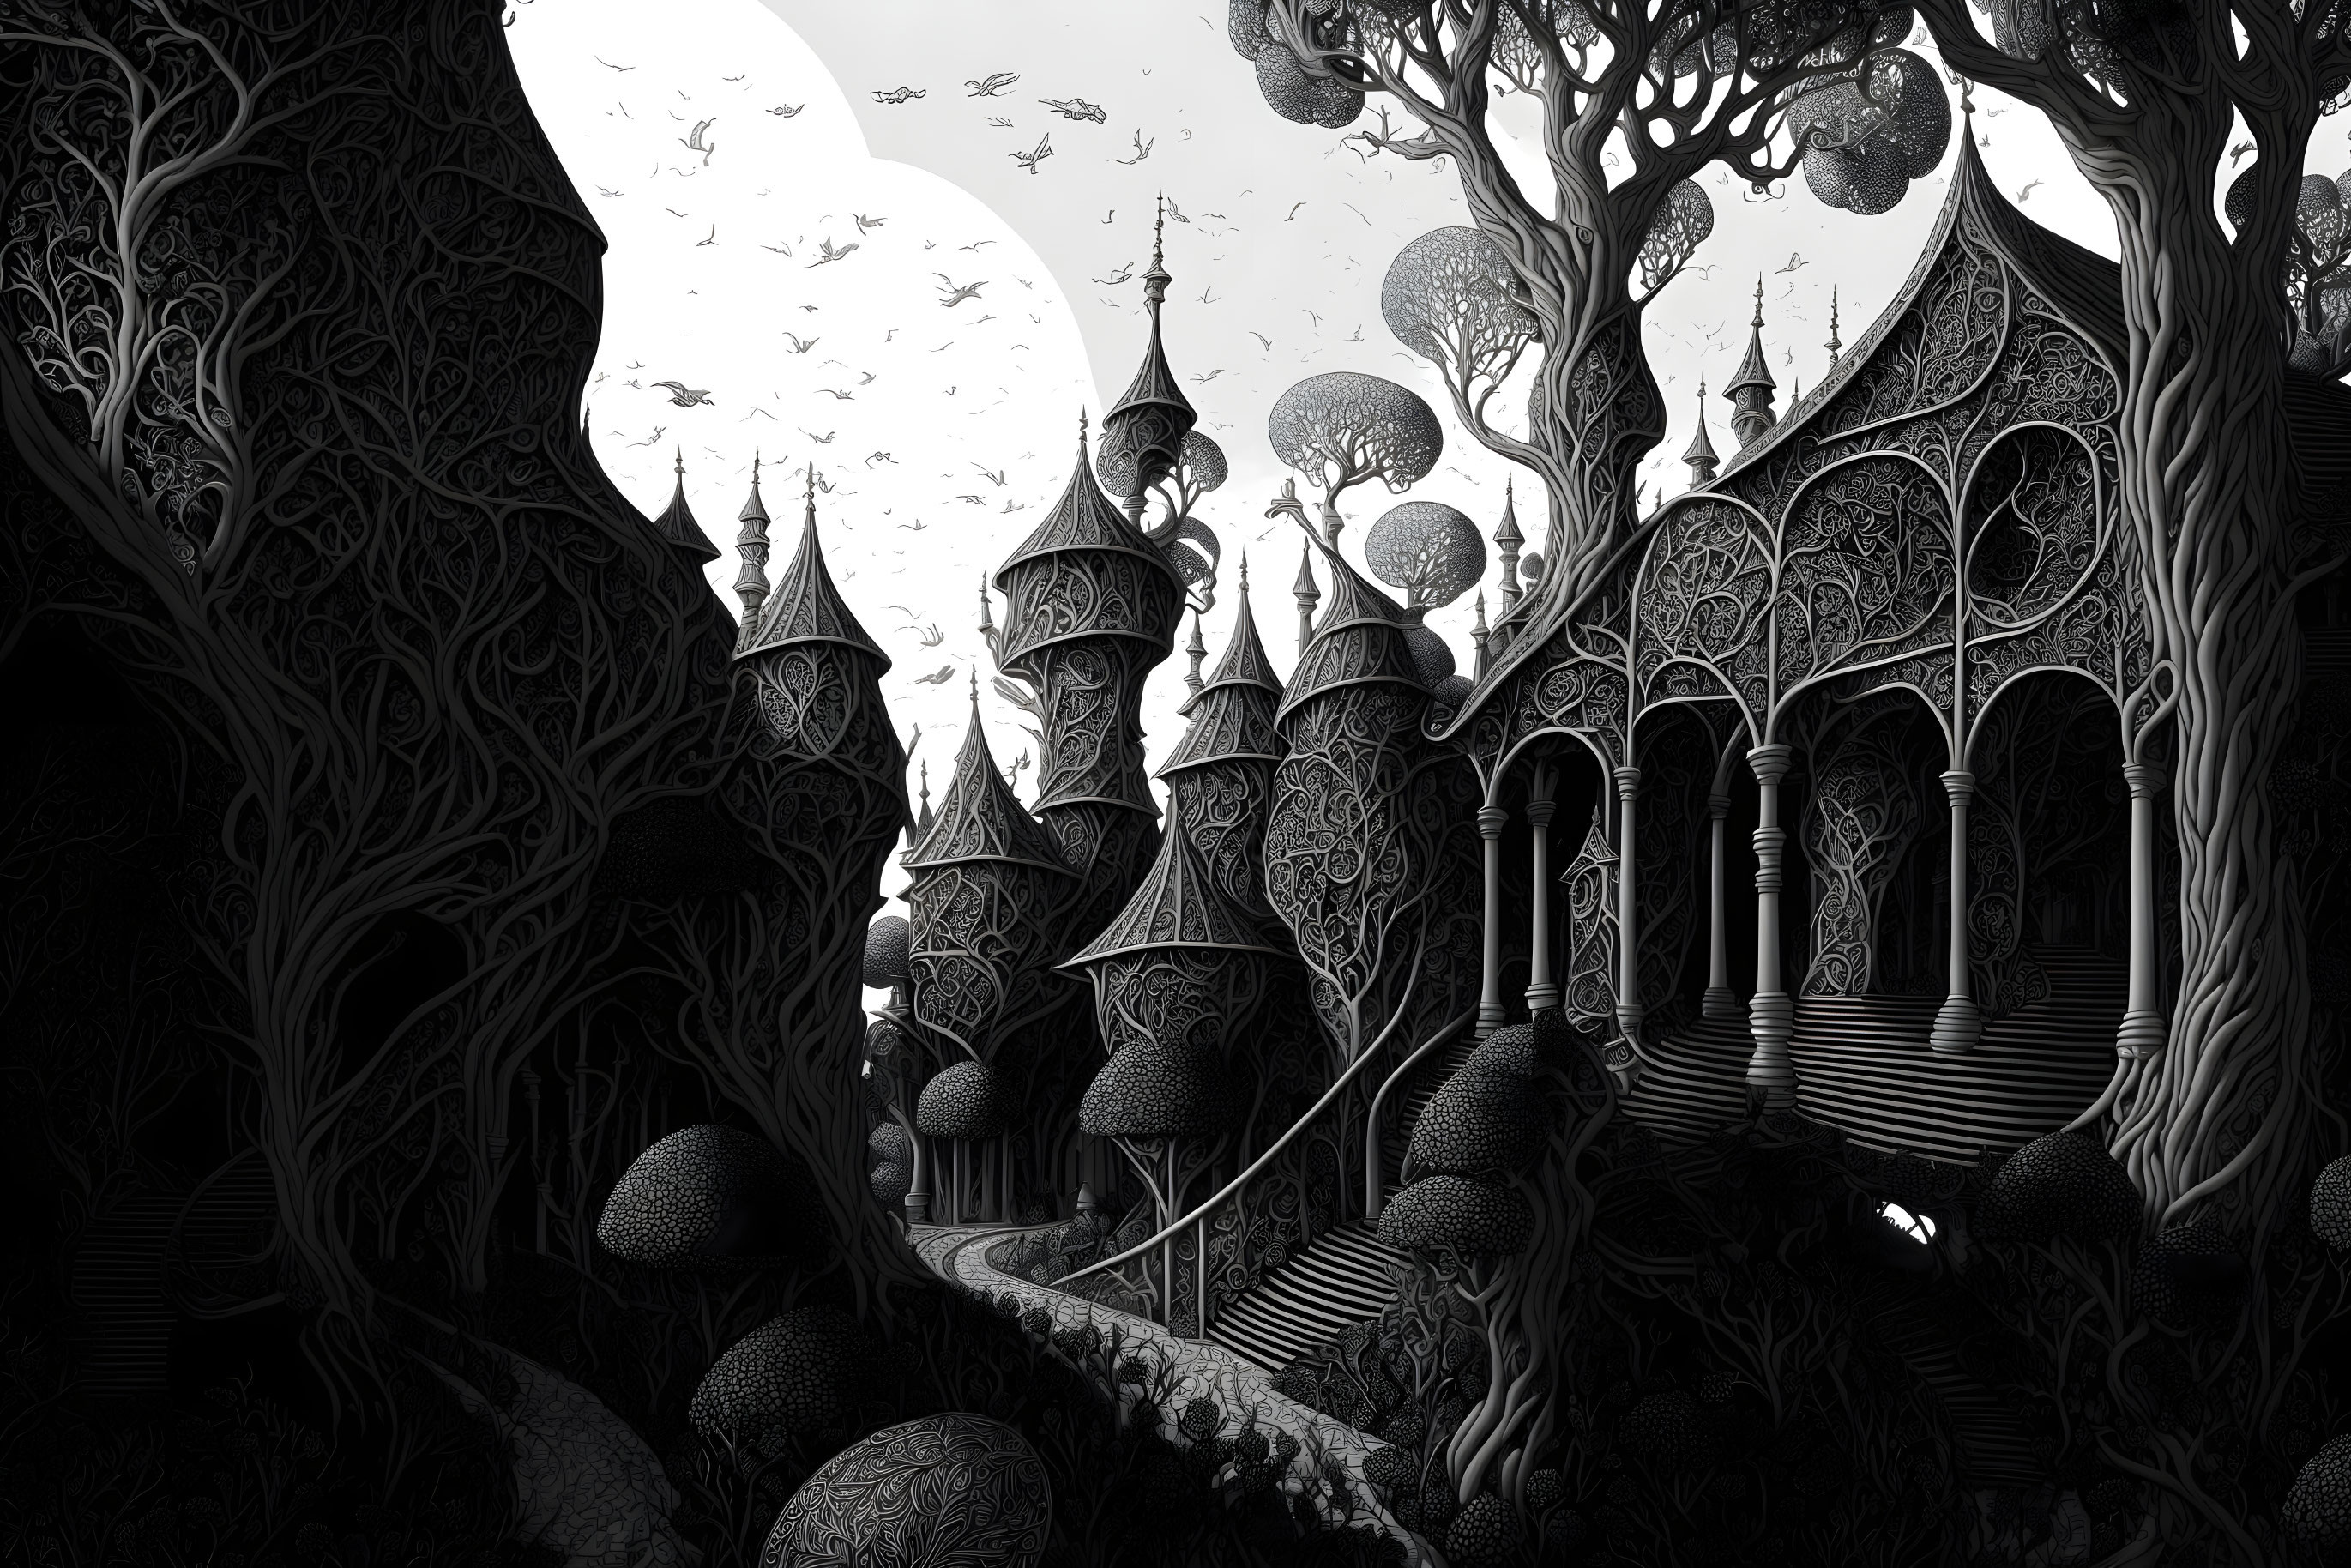 Monochrome fantasy landscape with intricate structures and spherical elements